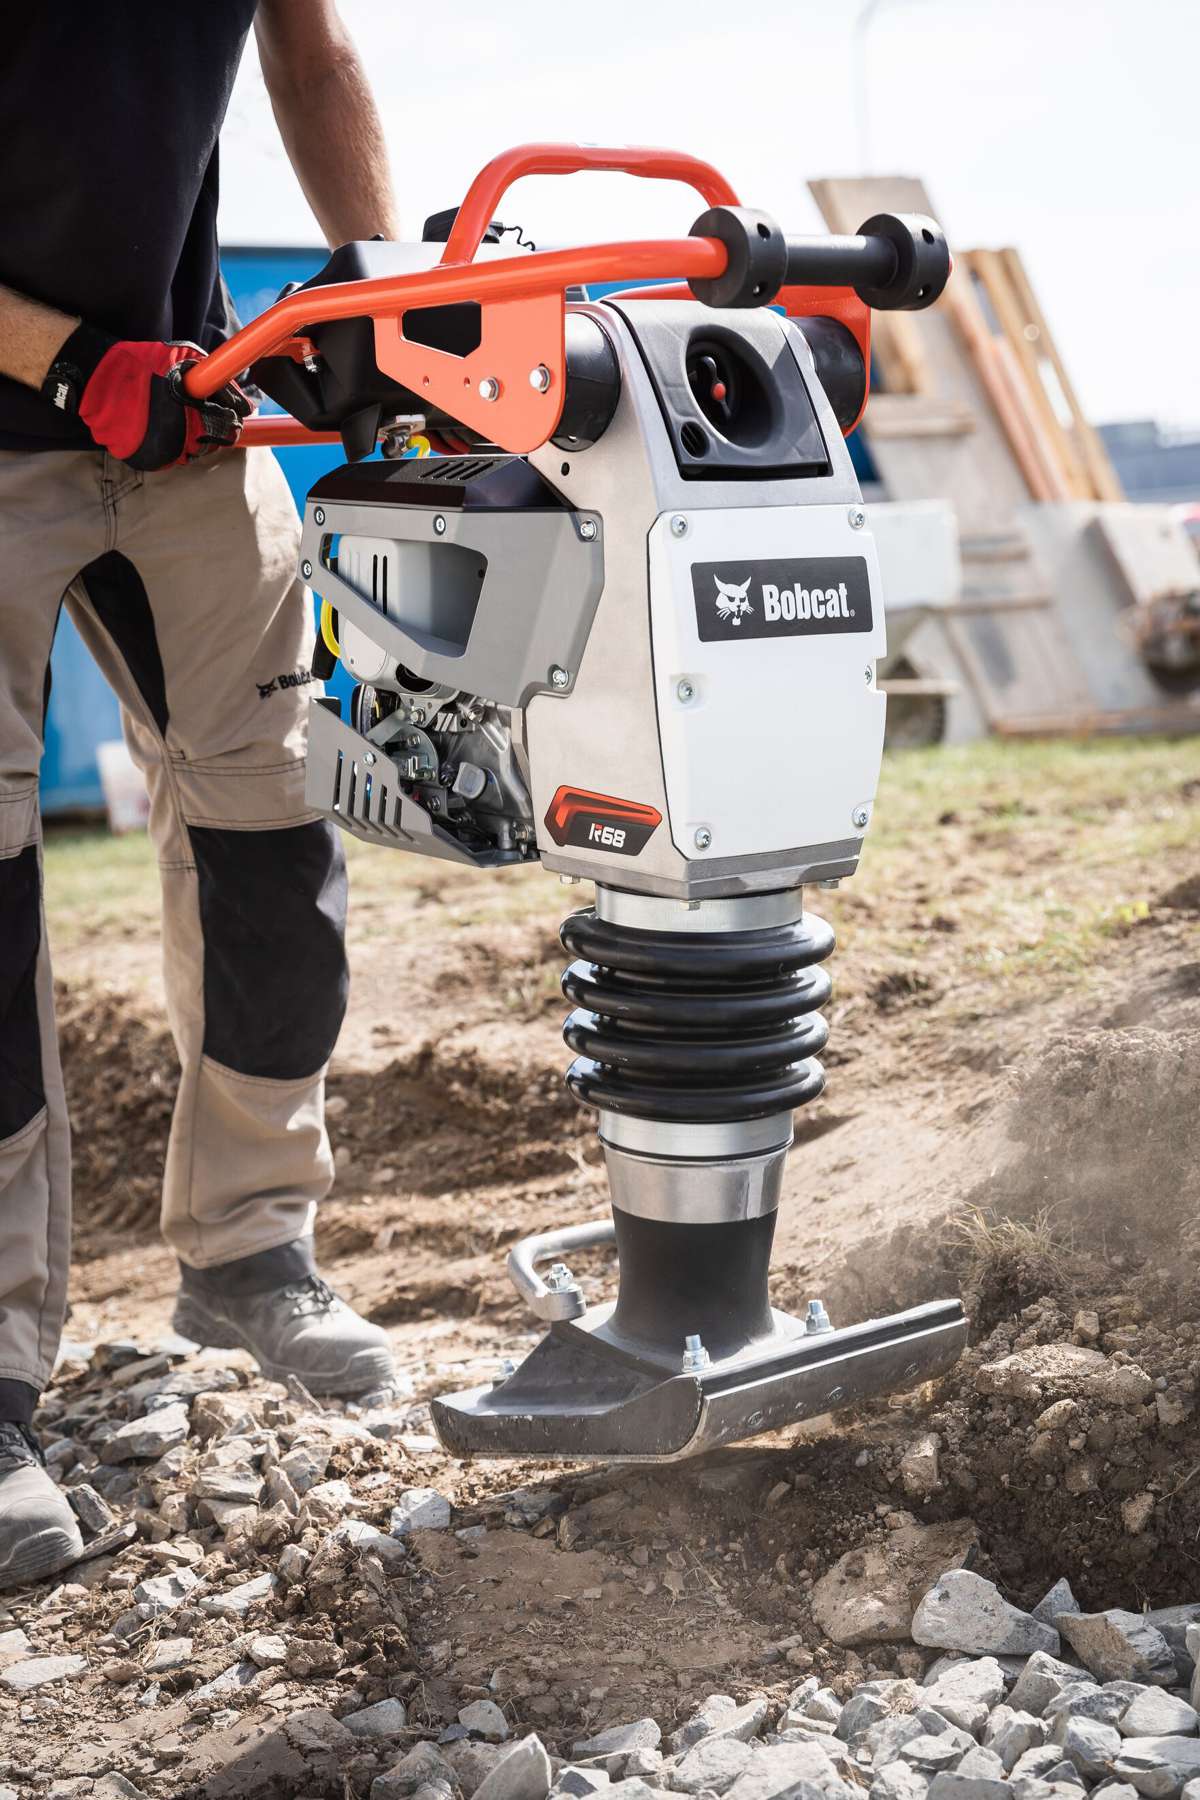 Bobcat smooths the way with new light compaction product line